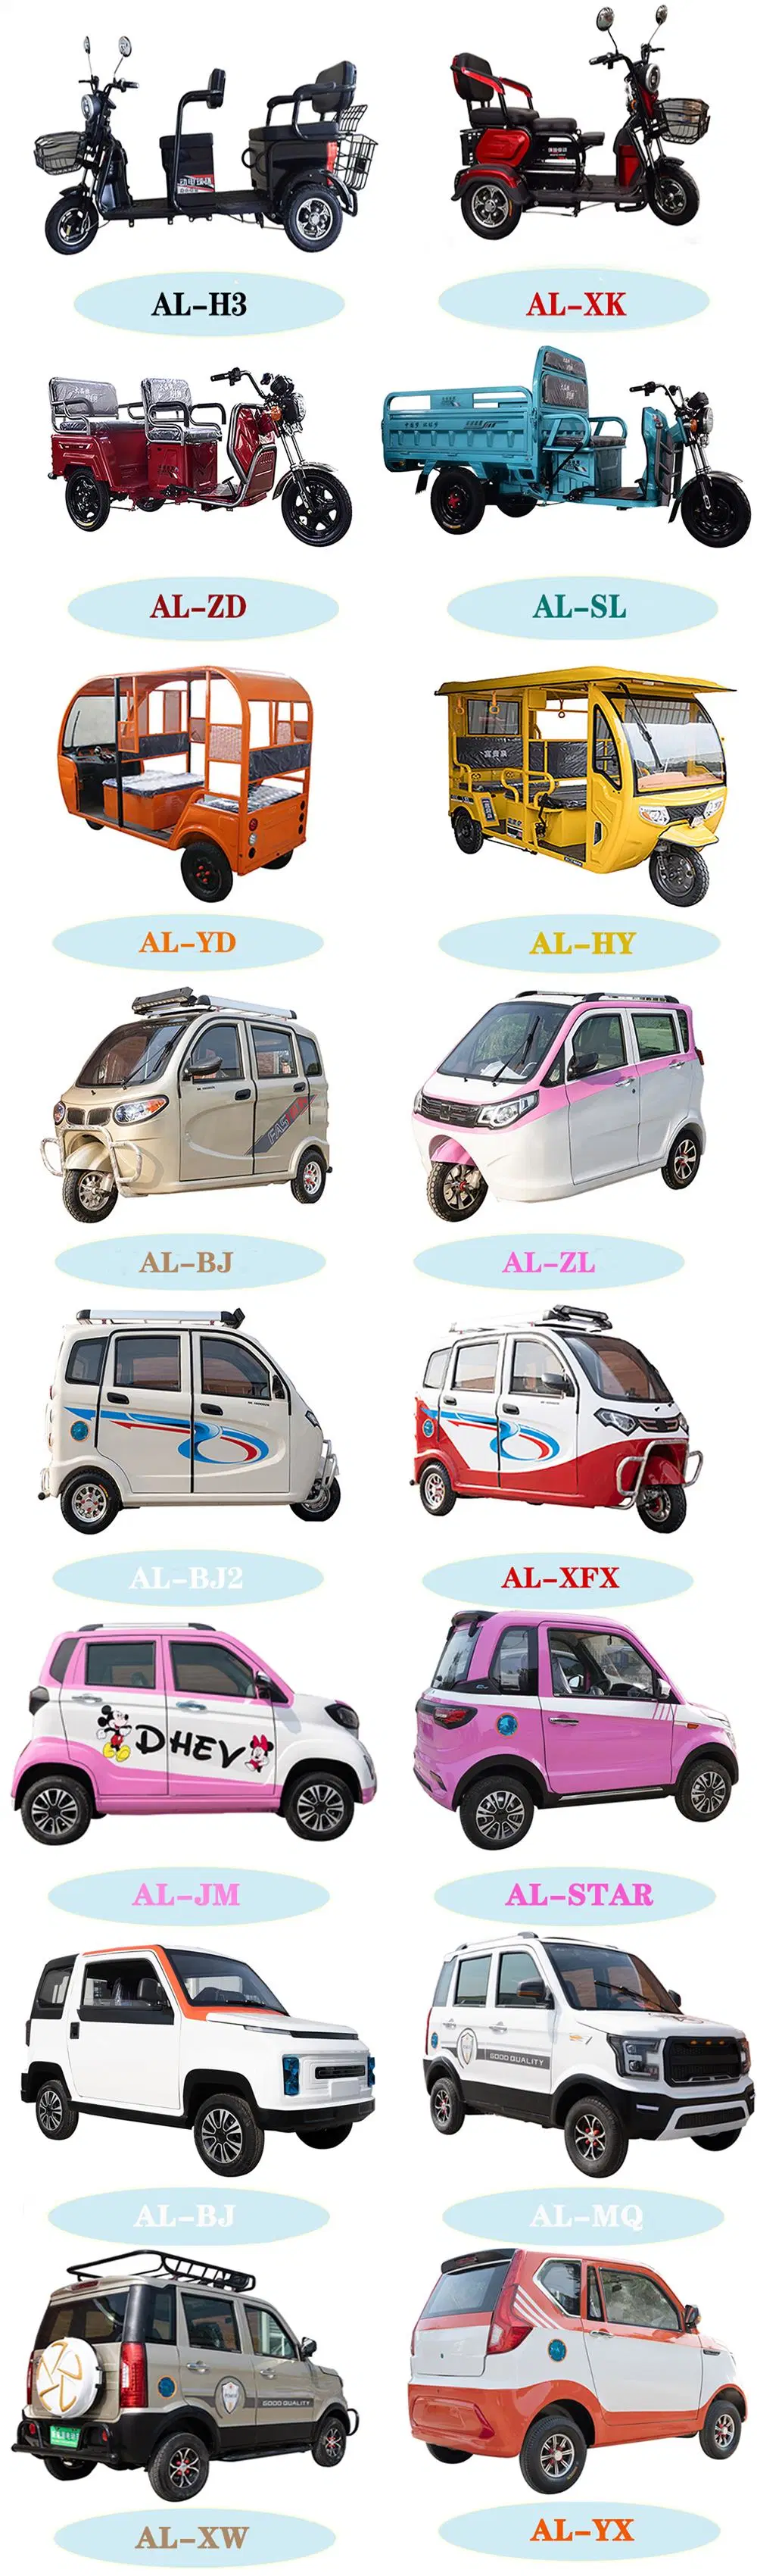 Al-Ant Electric Car From China Electric Car Philippines Price